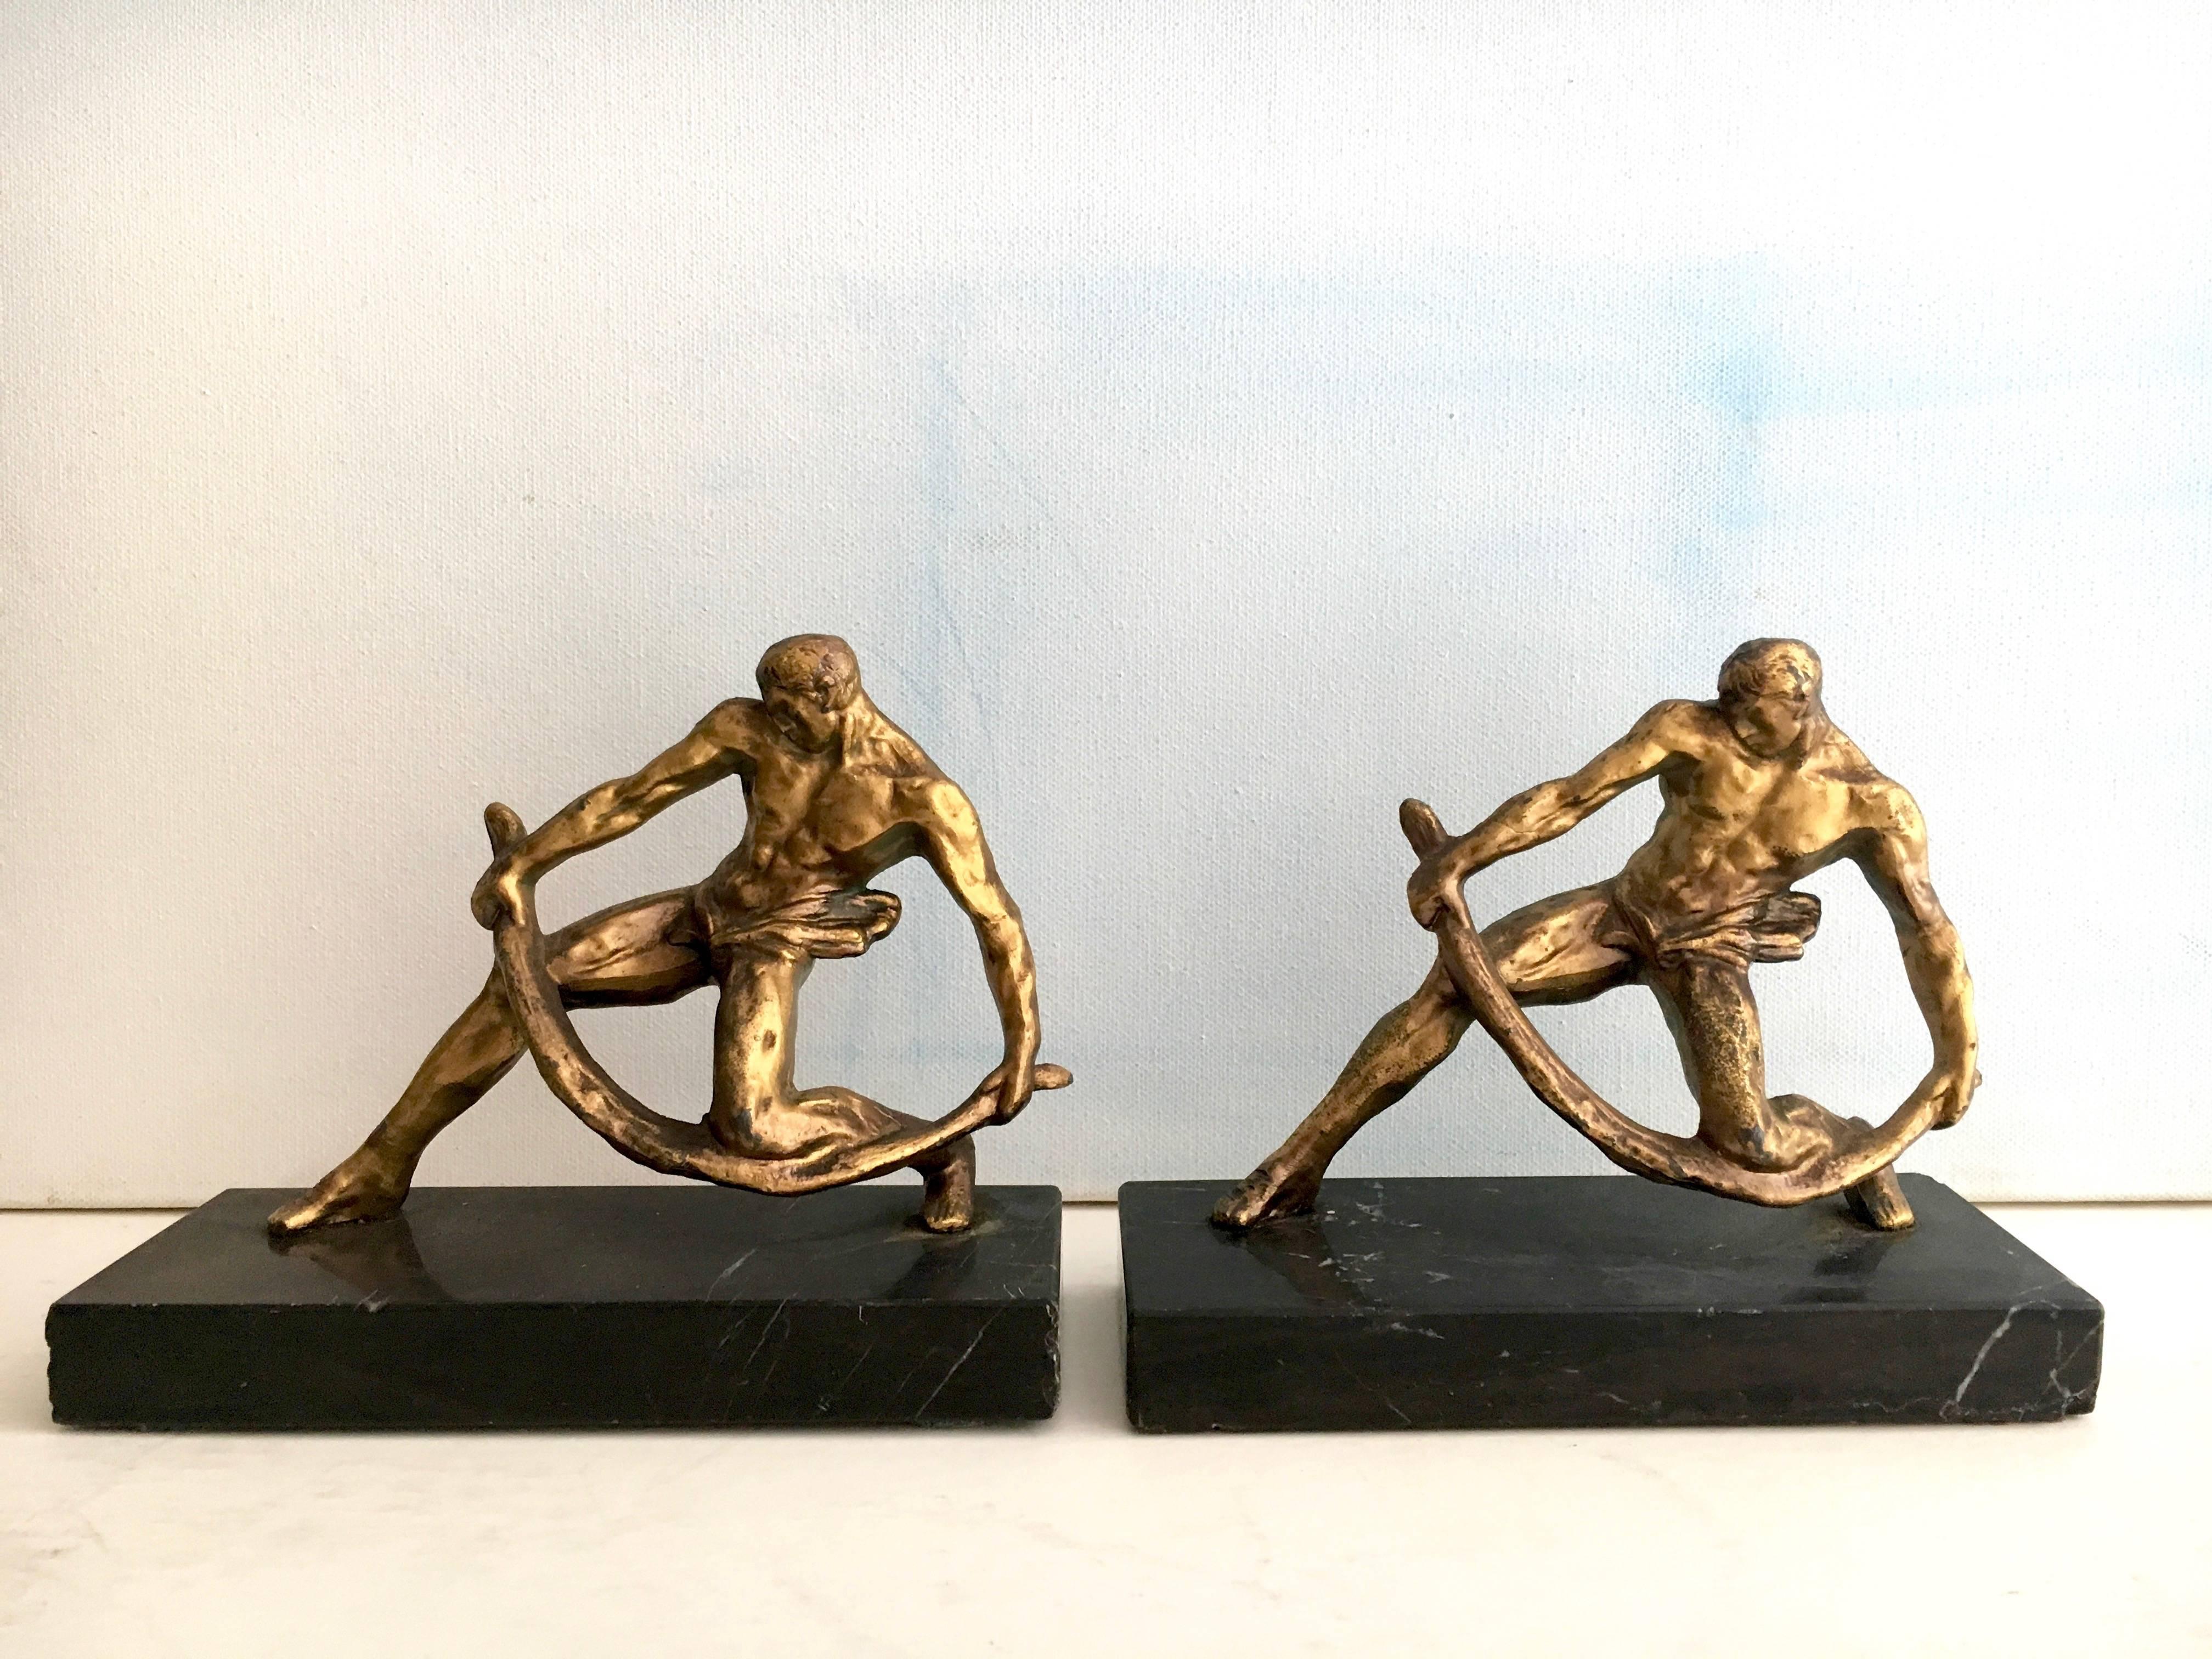 Who can't use two more muscle men around??

The pair are exceptional and will hold your finest periodicals! Stunning gilt figures, gracefully paired on marble stands. The marble does have a few nicks, but it's not the marble that will draw the